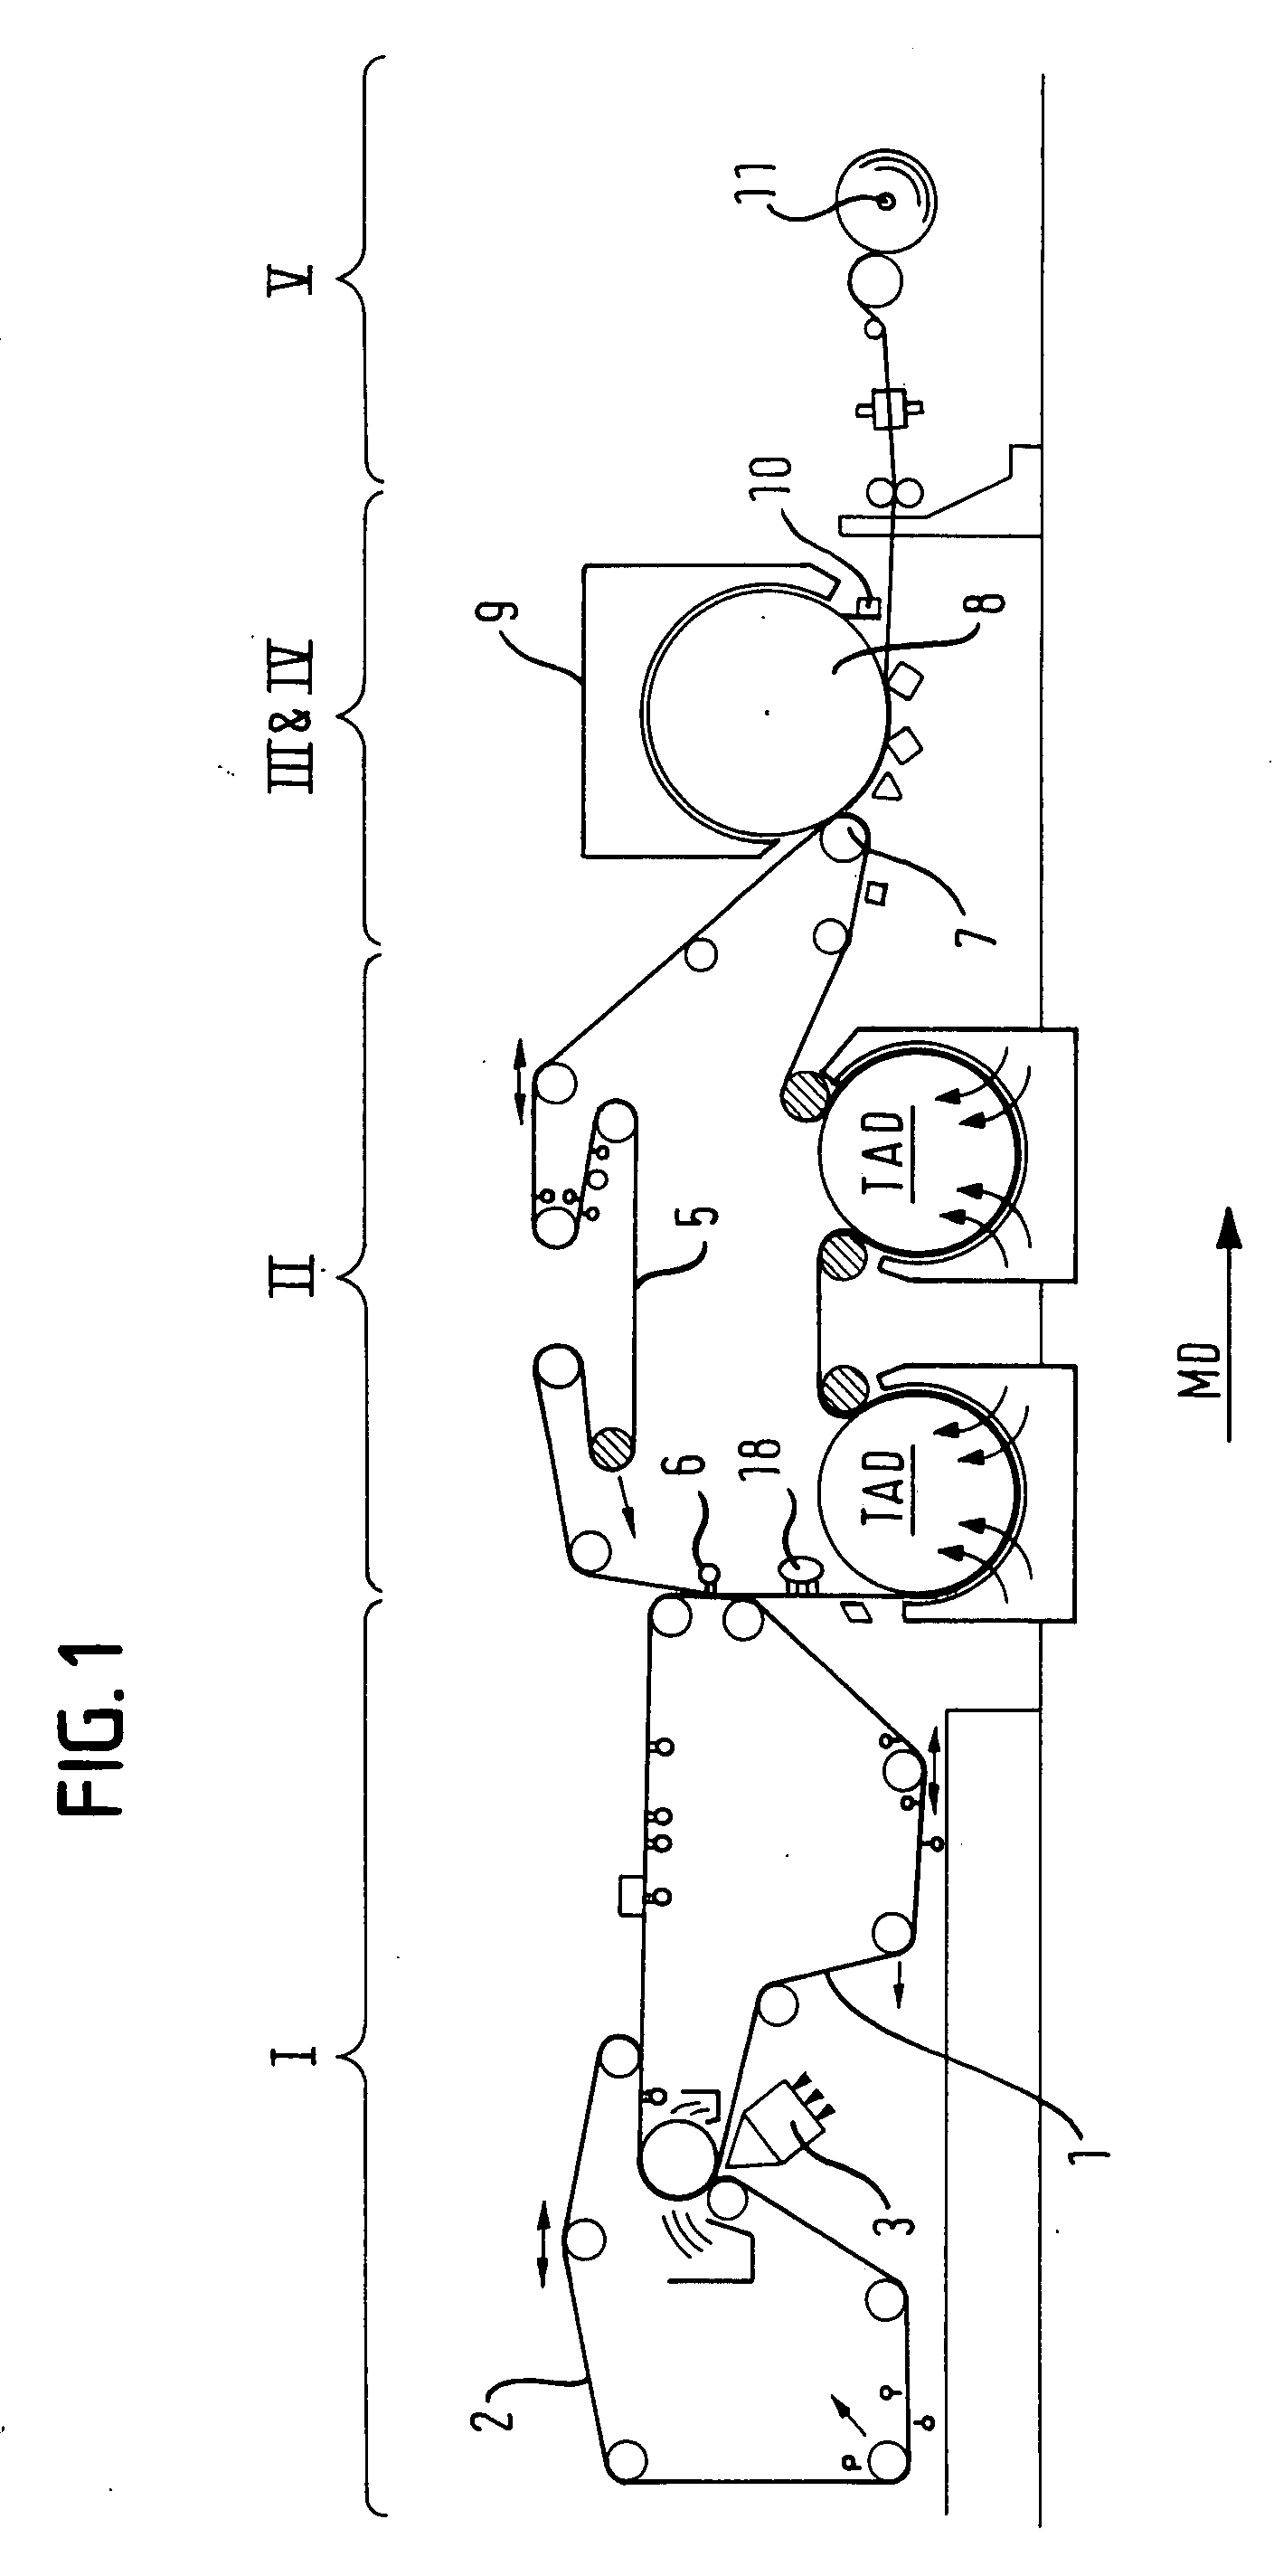 Tissue product, method of manufacture of a tissue product and apparatus for embossing a tissue ply